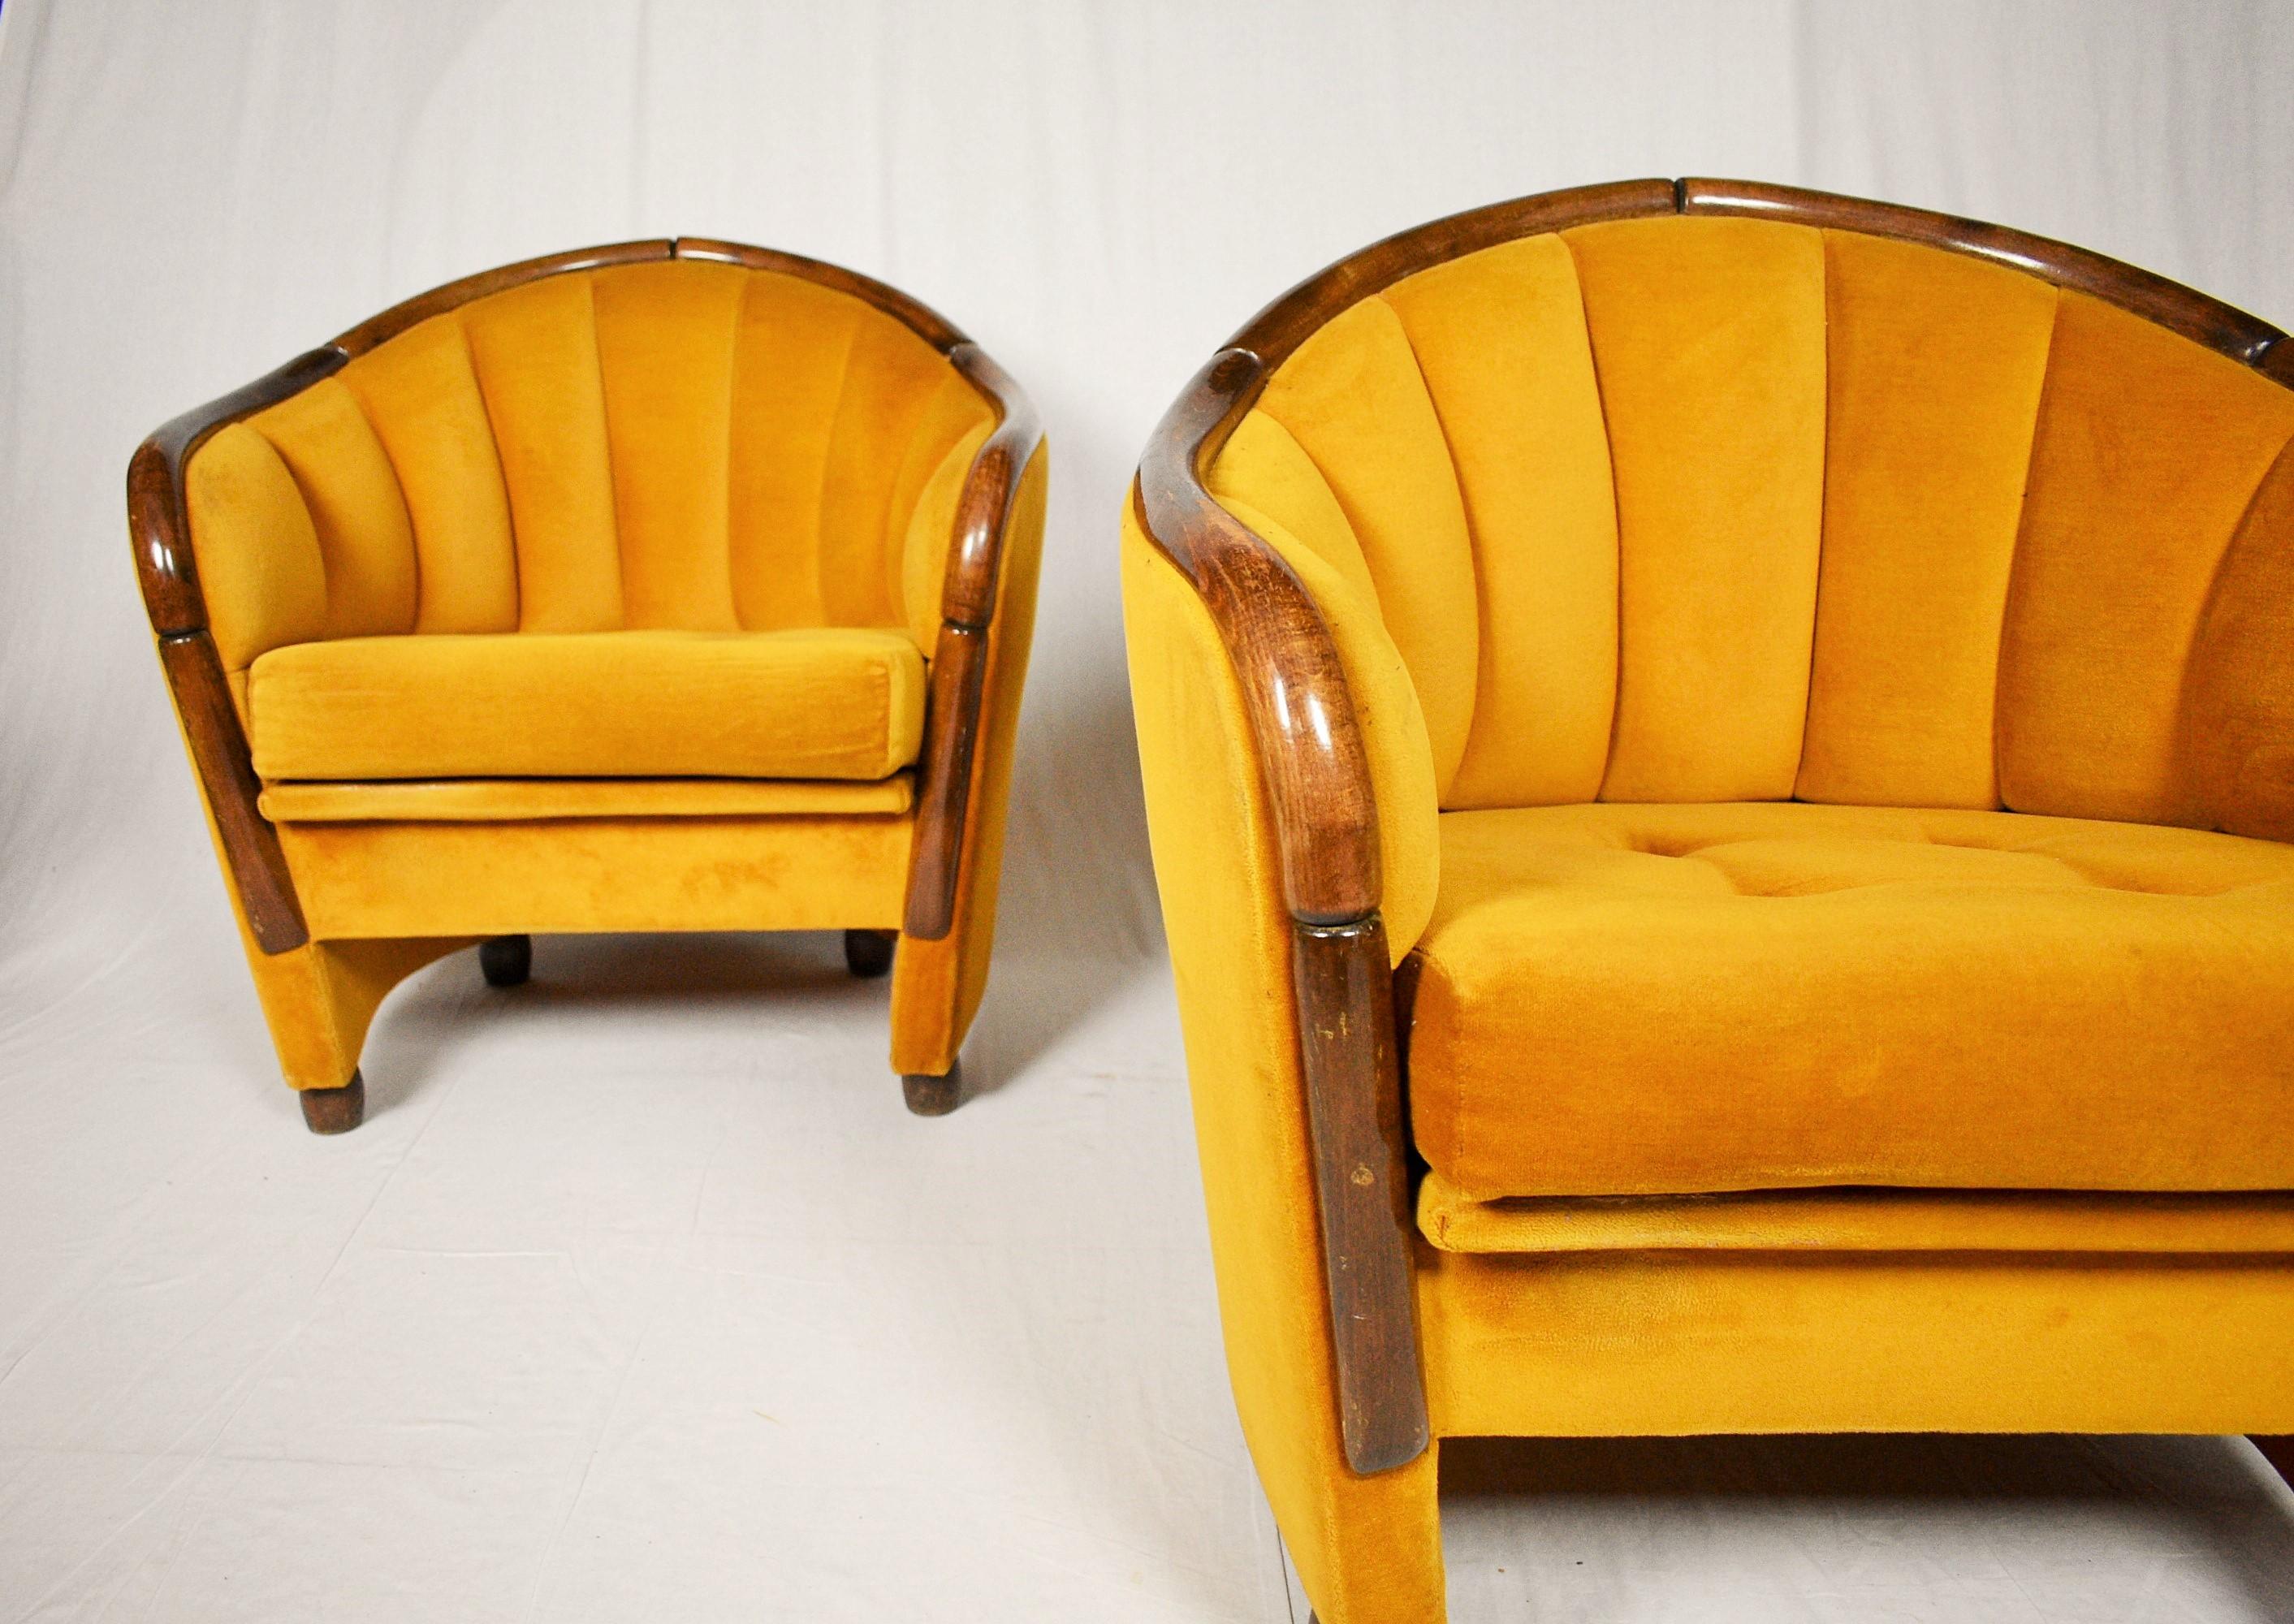 - Made in Italy
- Made of wood
- Original upholstery
- Upholstery has some signs use
- Good, original condition.
- Cleaned.